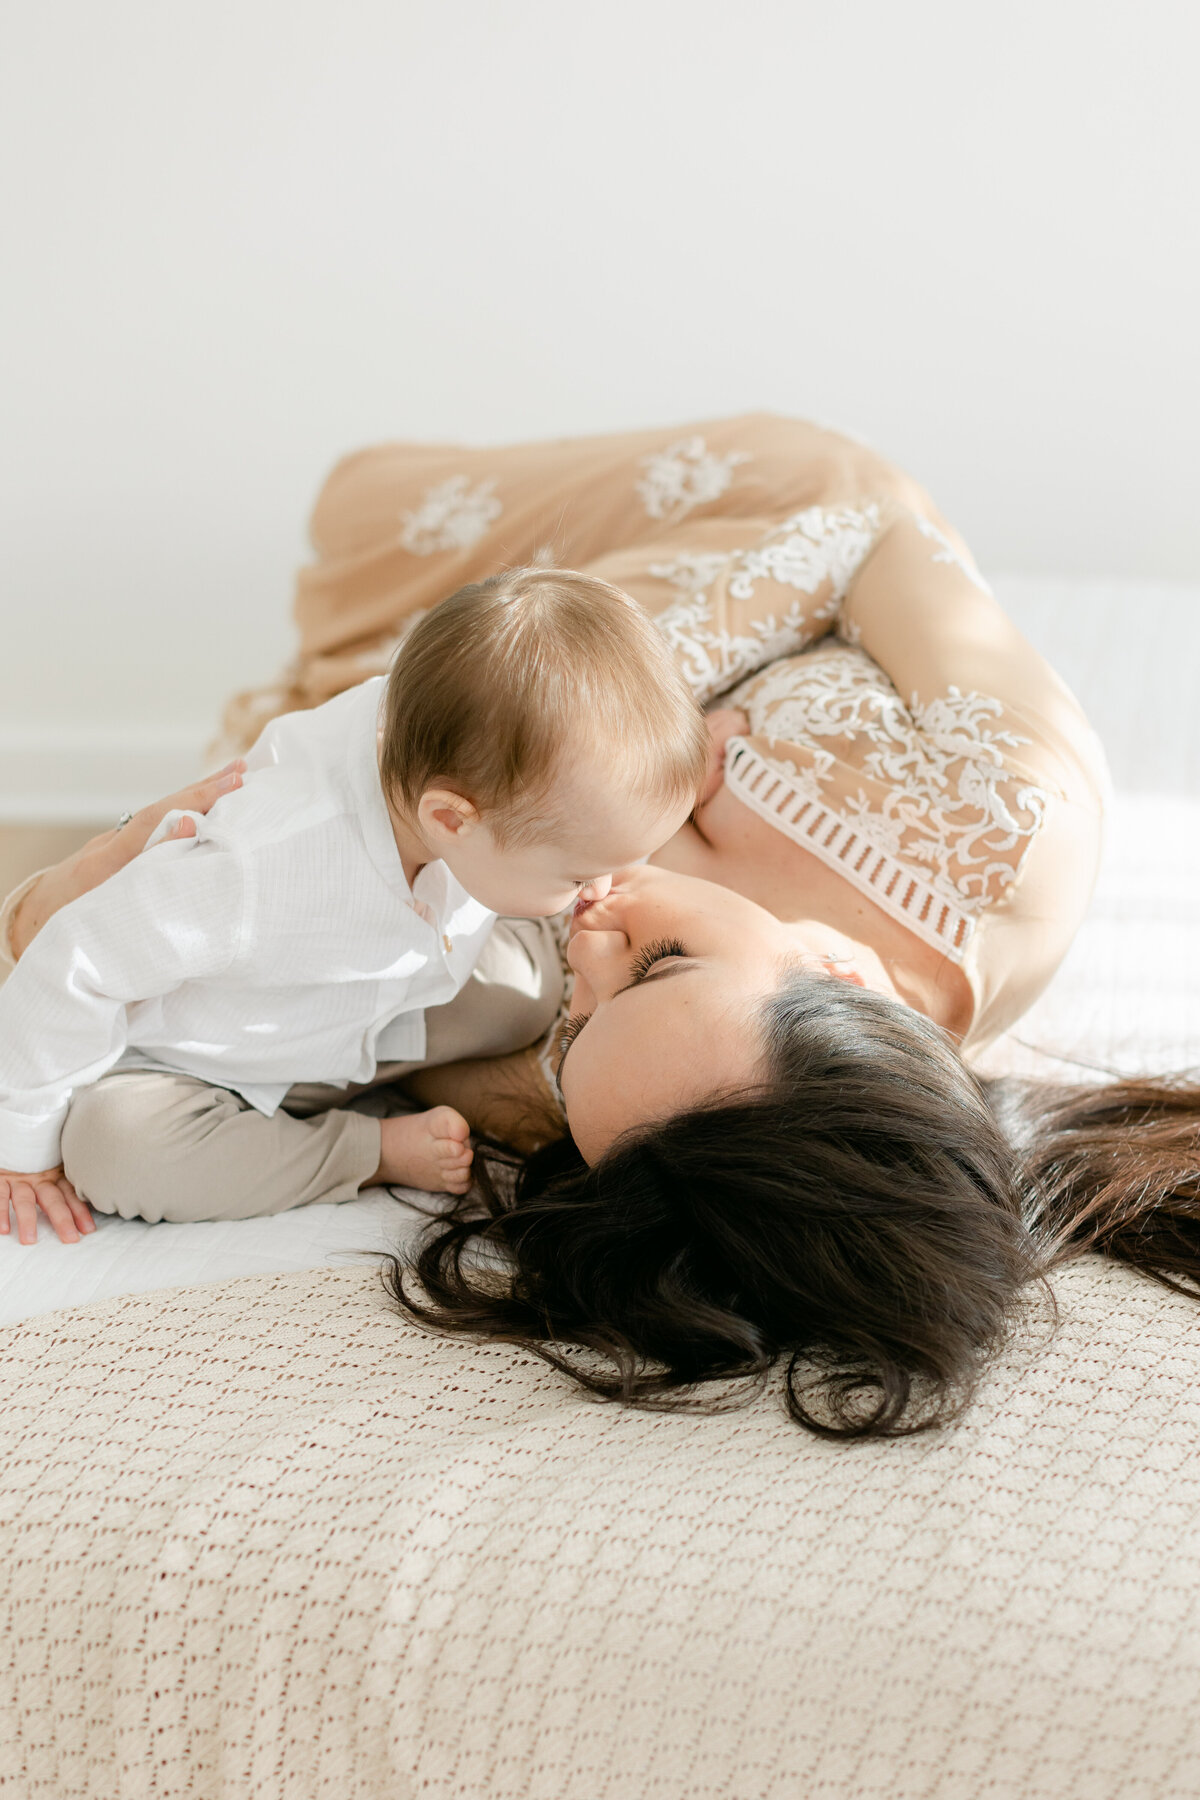 mom kissing her toddler son while laying on a bed in Philadelphia Portrait Photographer Tara Federico's natural light studio